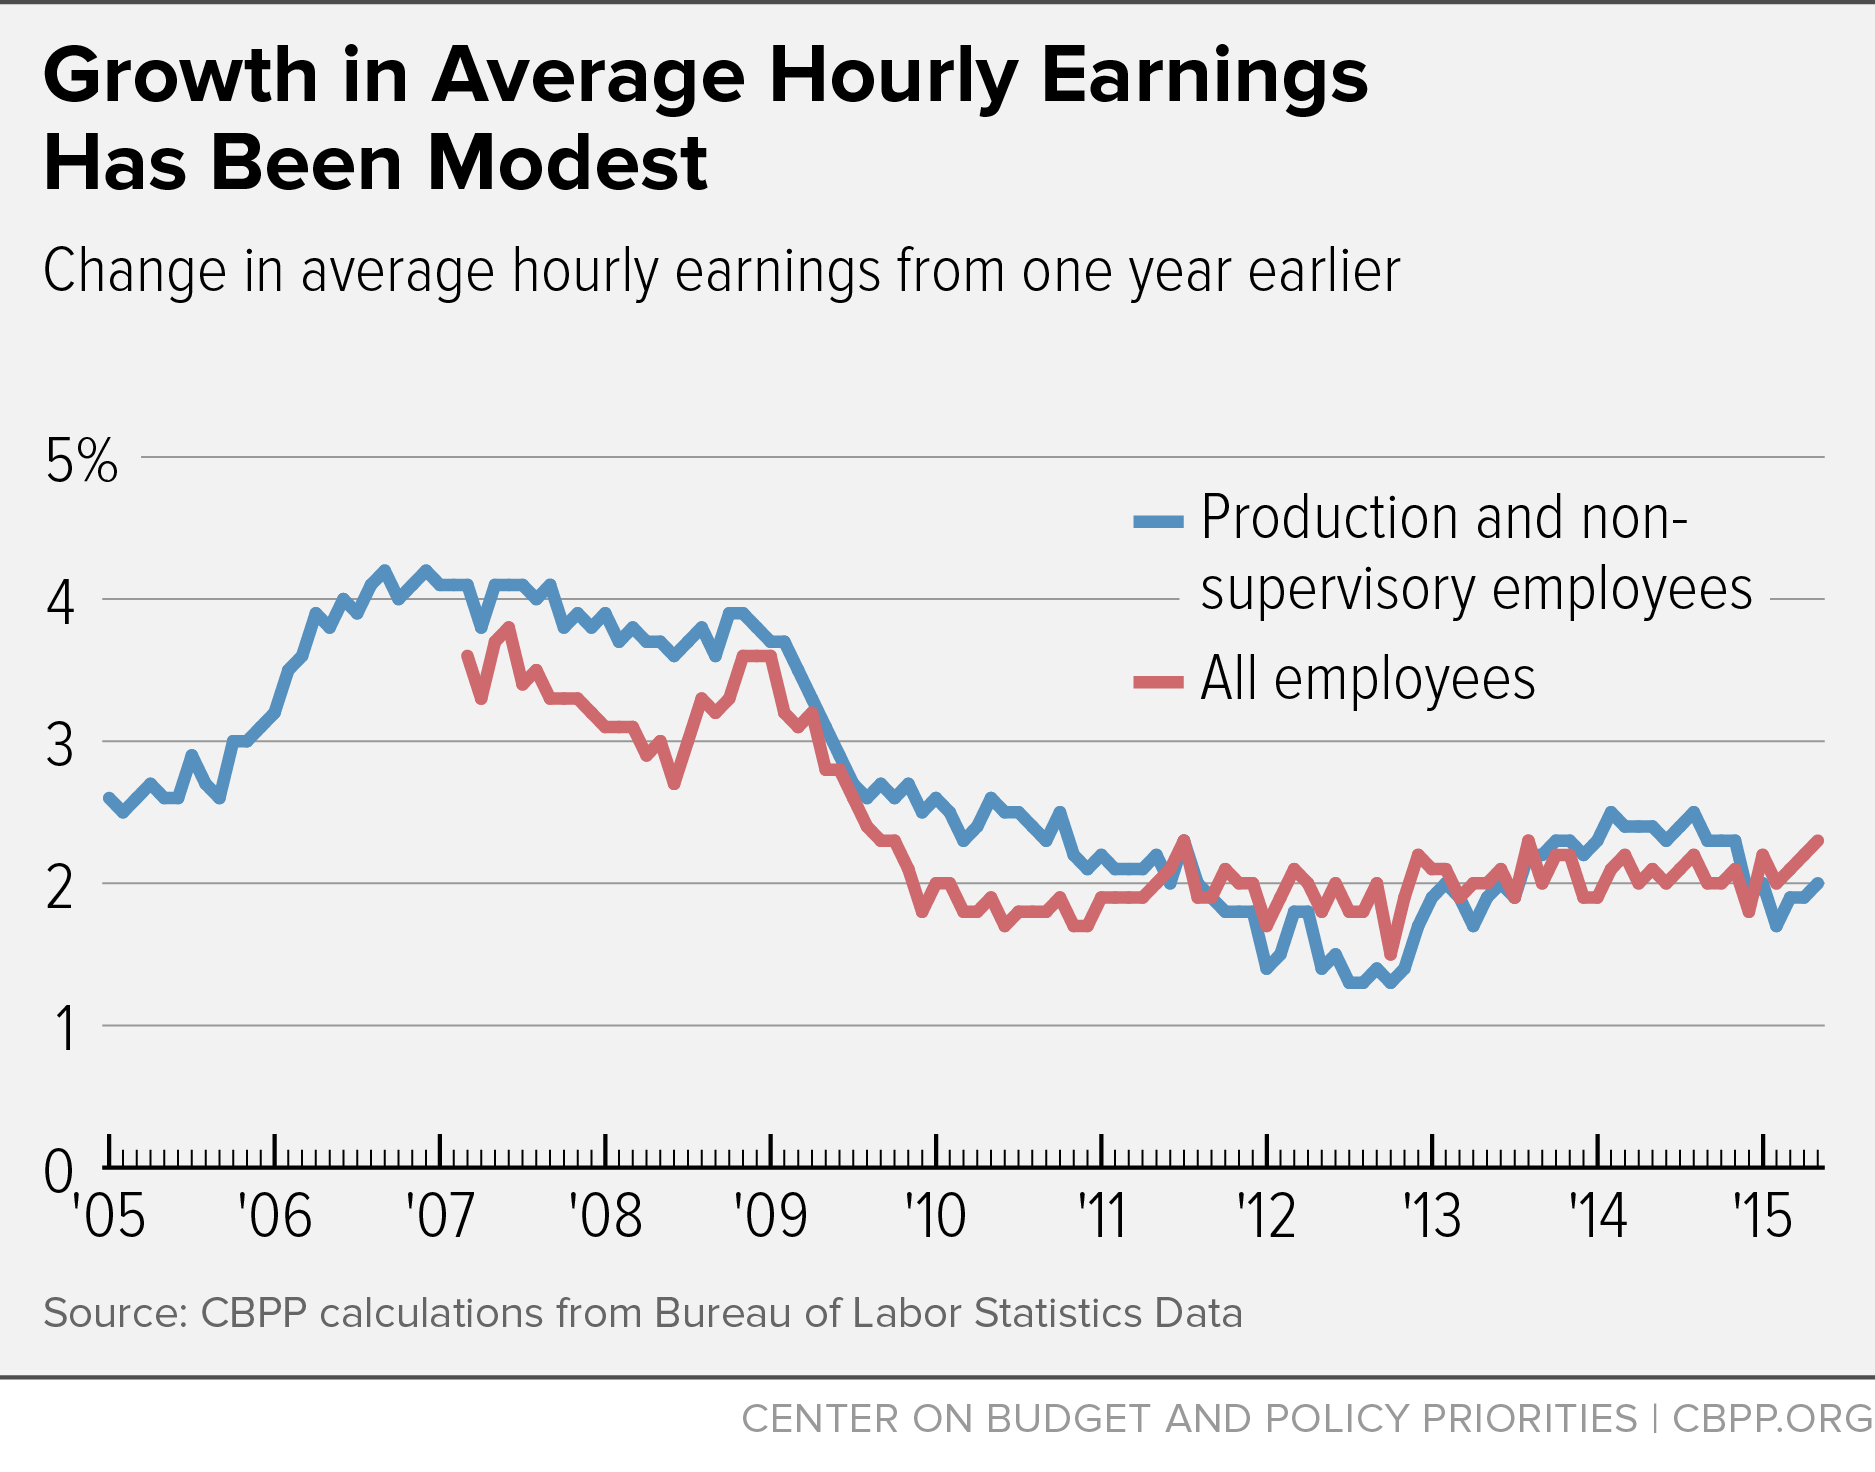 Growth in Average Hourly Earnings Has Been Modest (June 5, 2015)